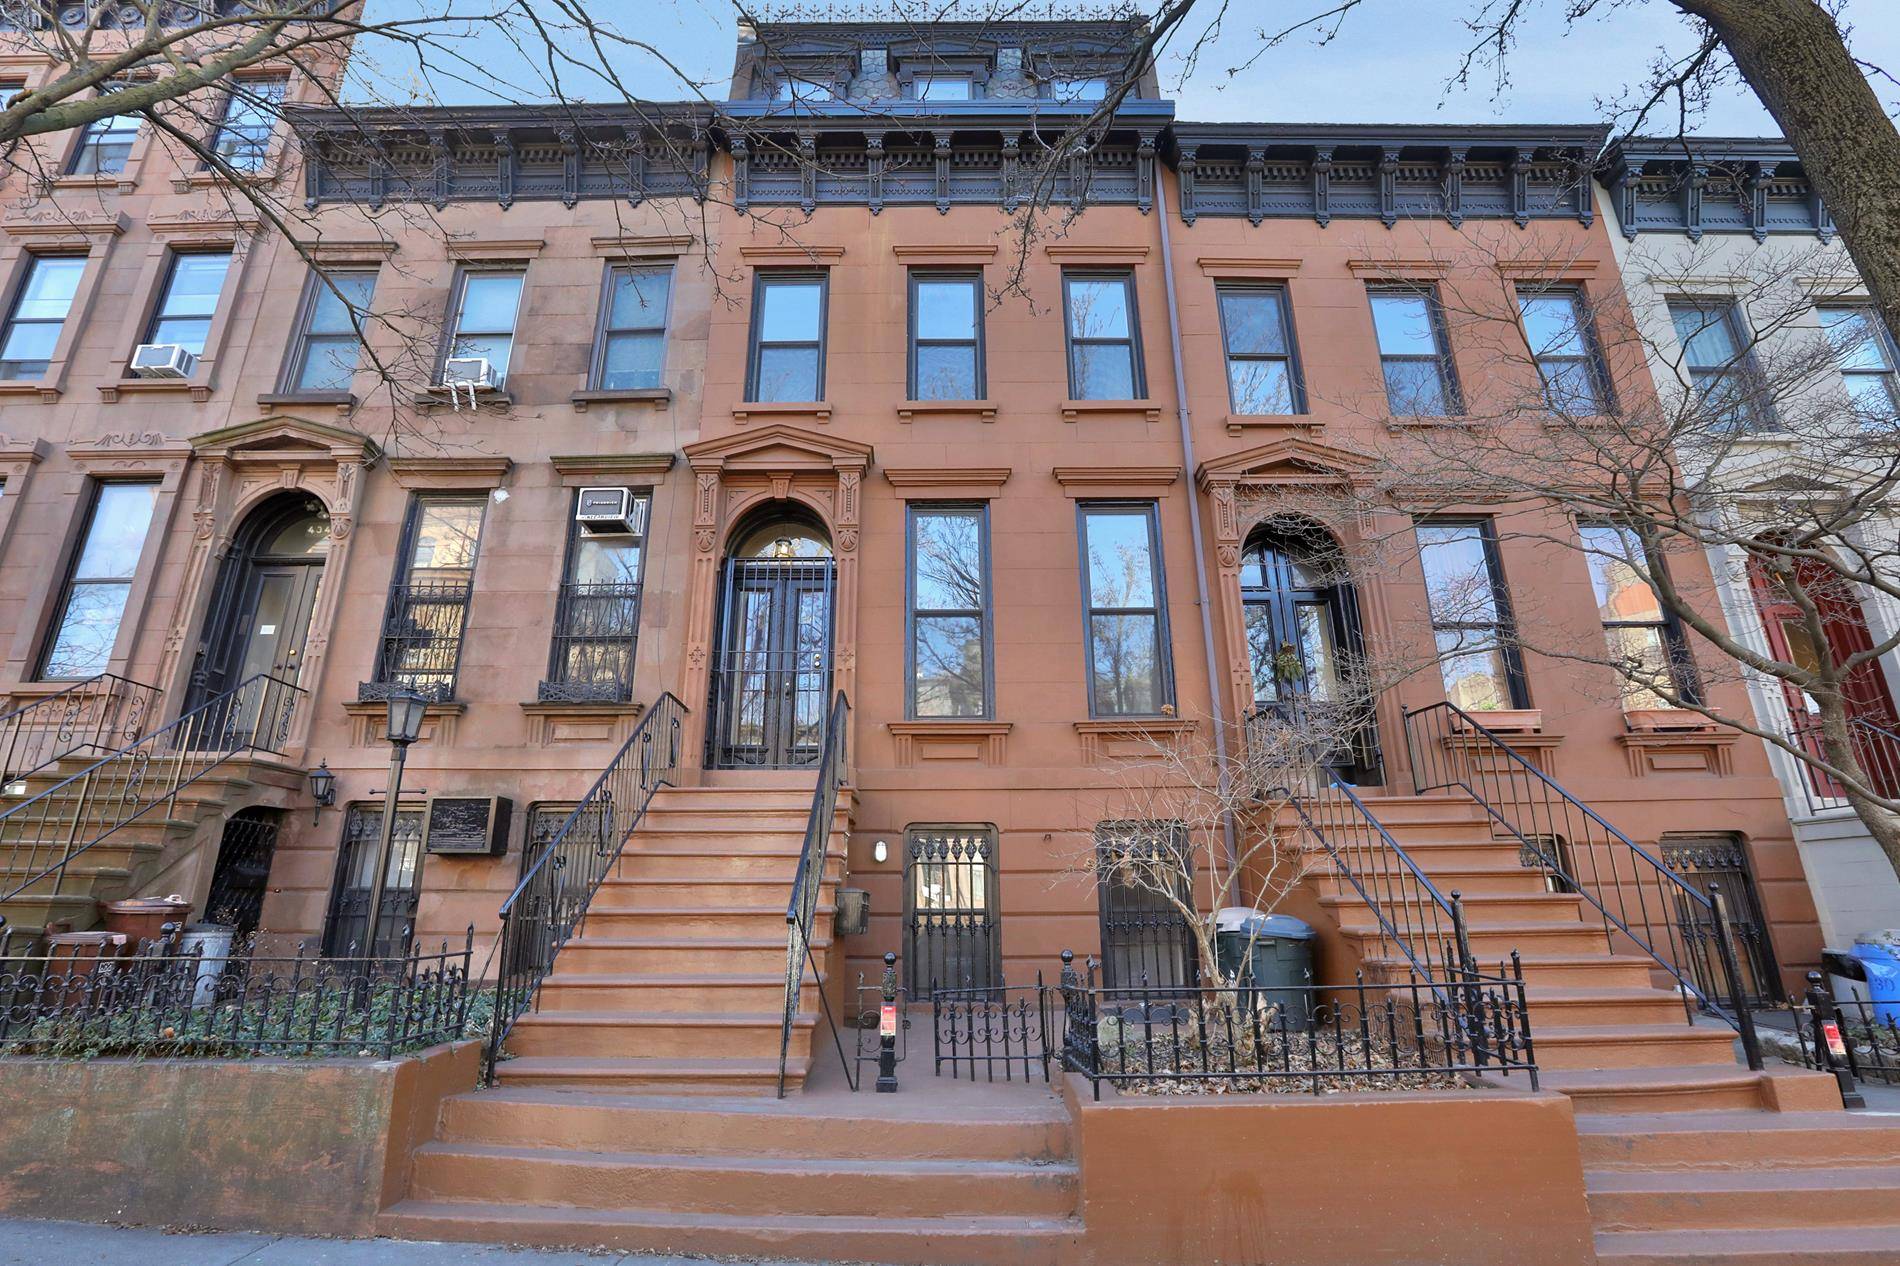 DWELL Residential is pleased to present this amazing opportunity to create the home of your dreams in this 18'x 42' four story, Center Slope brownstone.